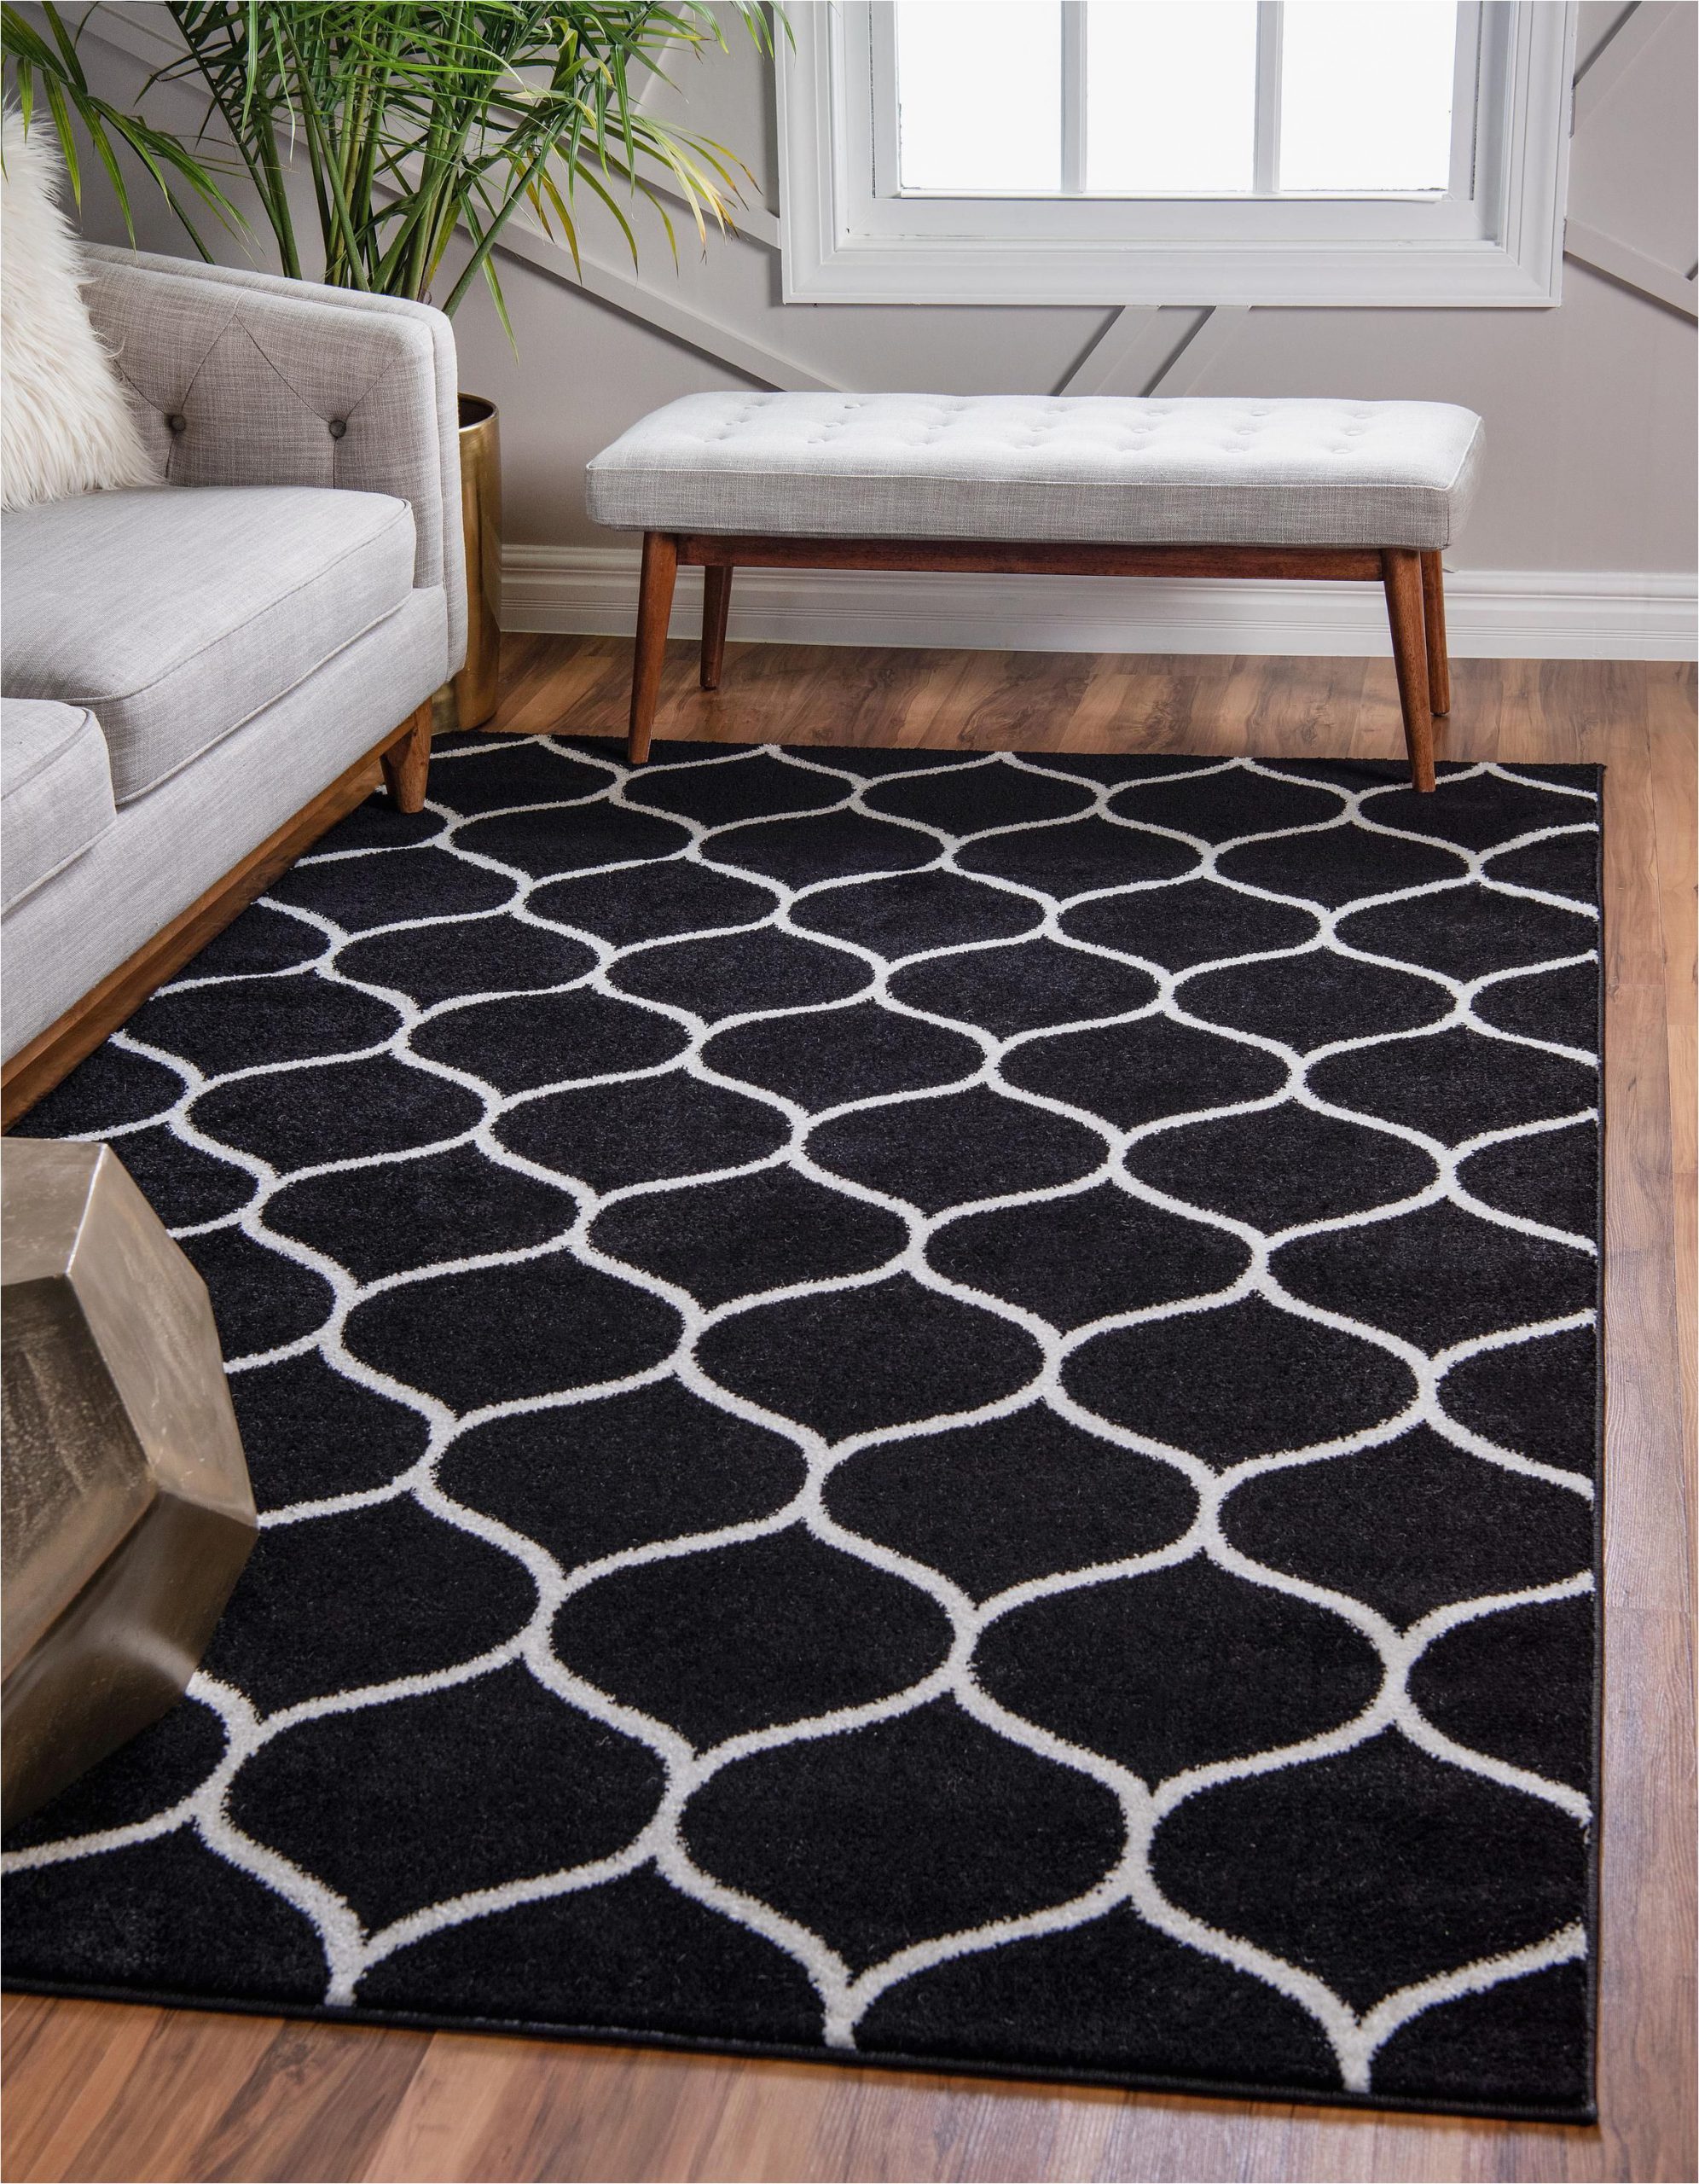 Bed Bath and Beyond area Rugs 3×5 Find Stunning Patterns within Our Lattice Frieze Run that